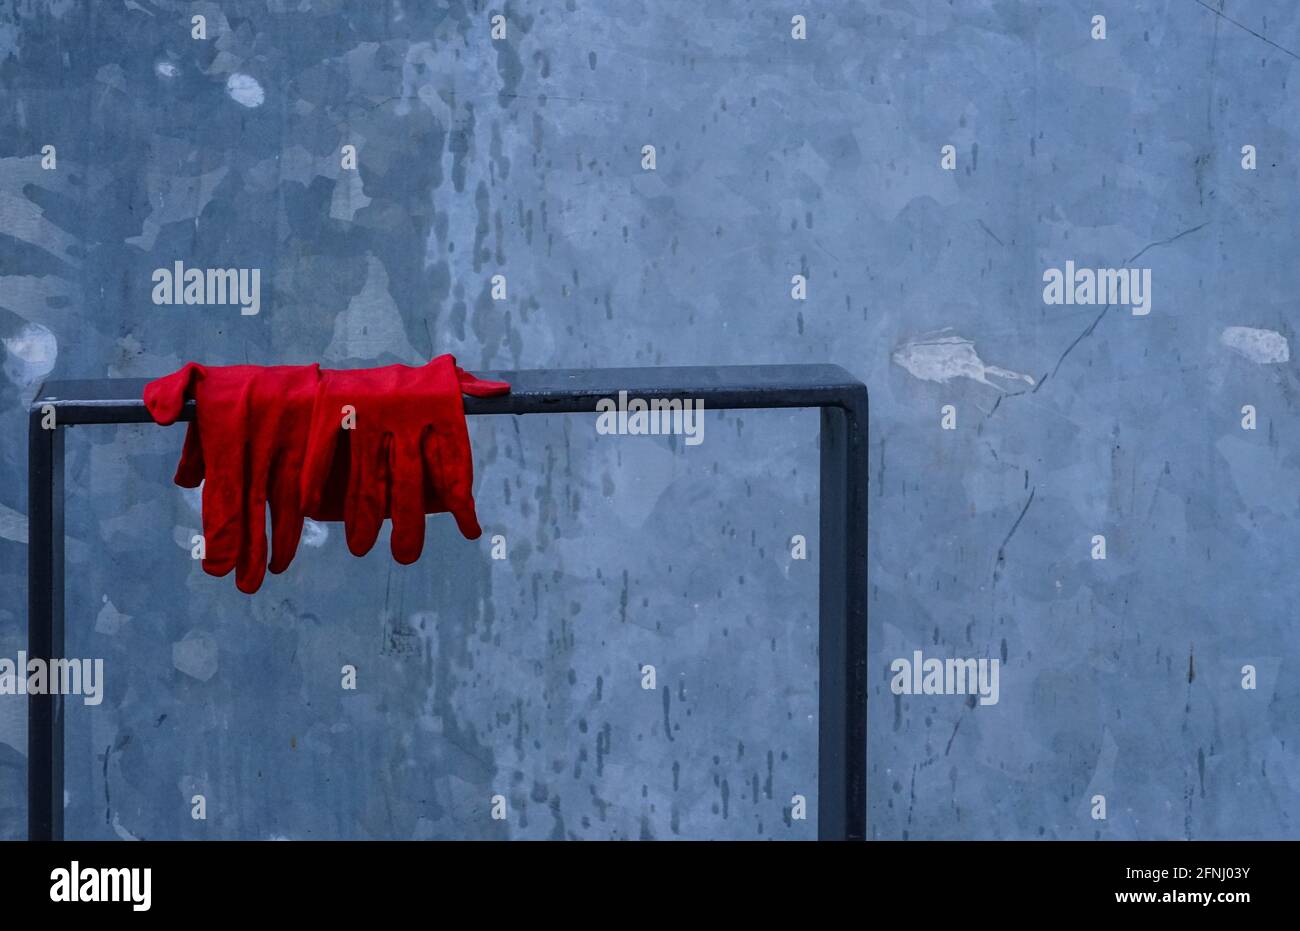 A pair of lost red gloves on a bicycle stand. Stock Photo